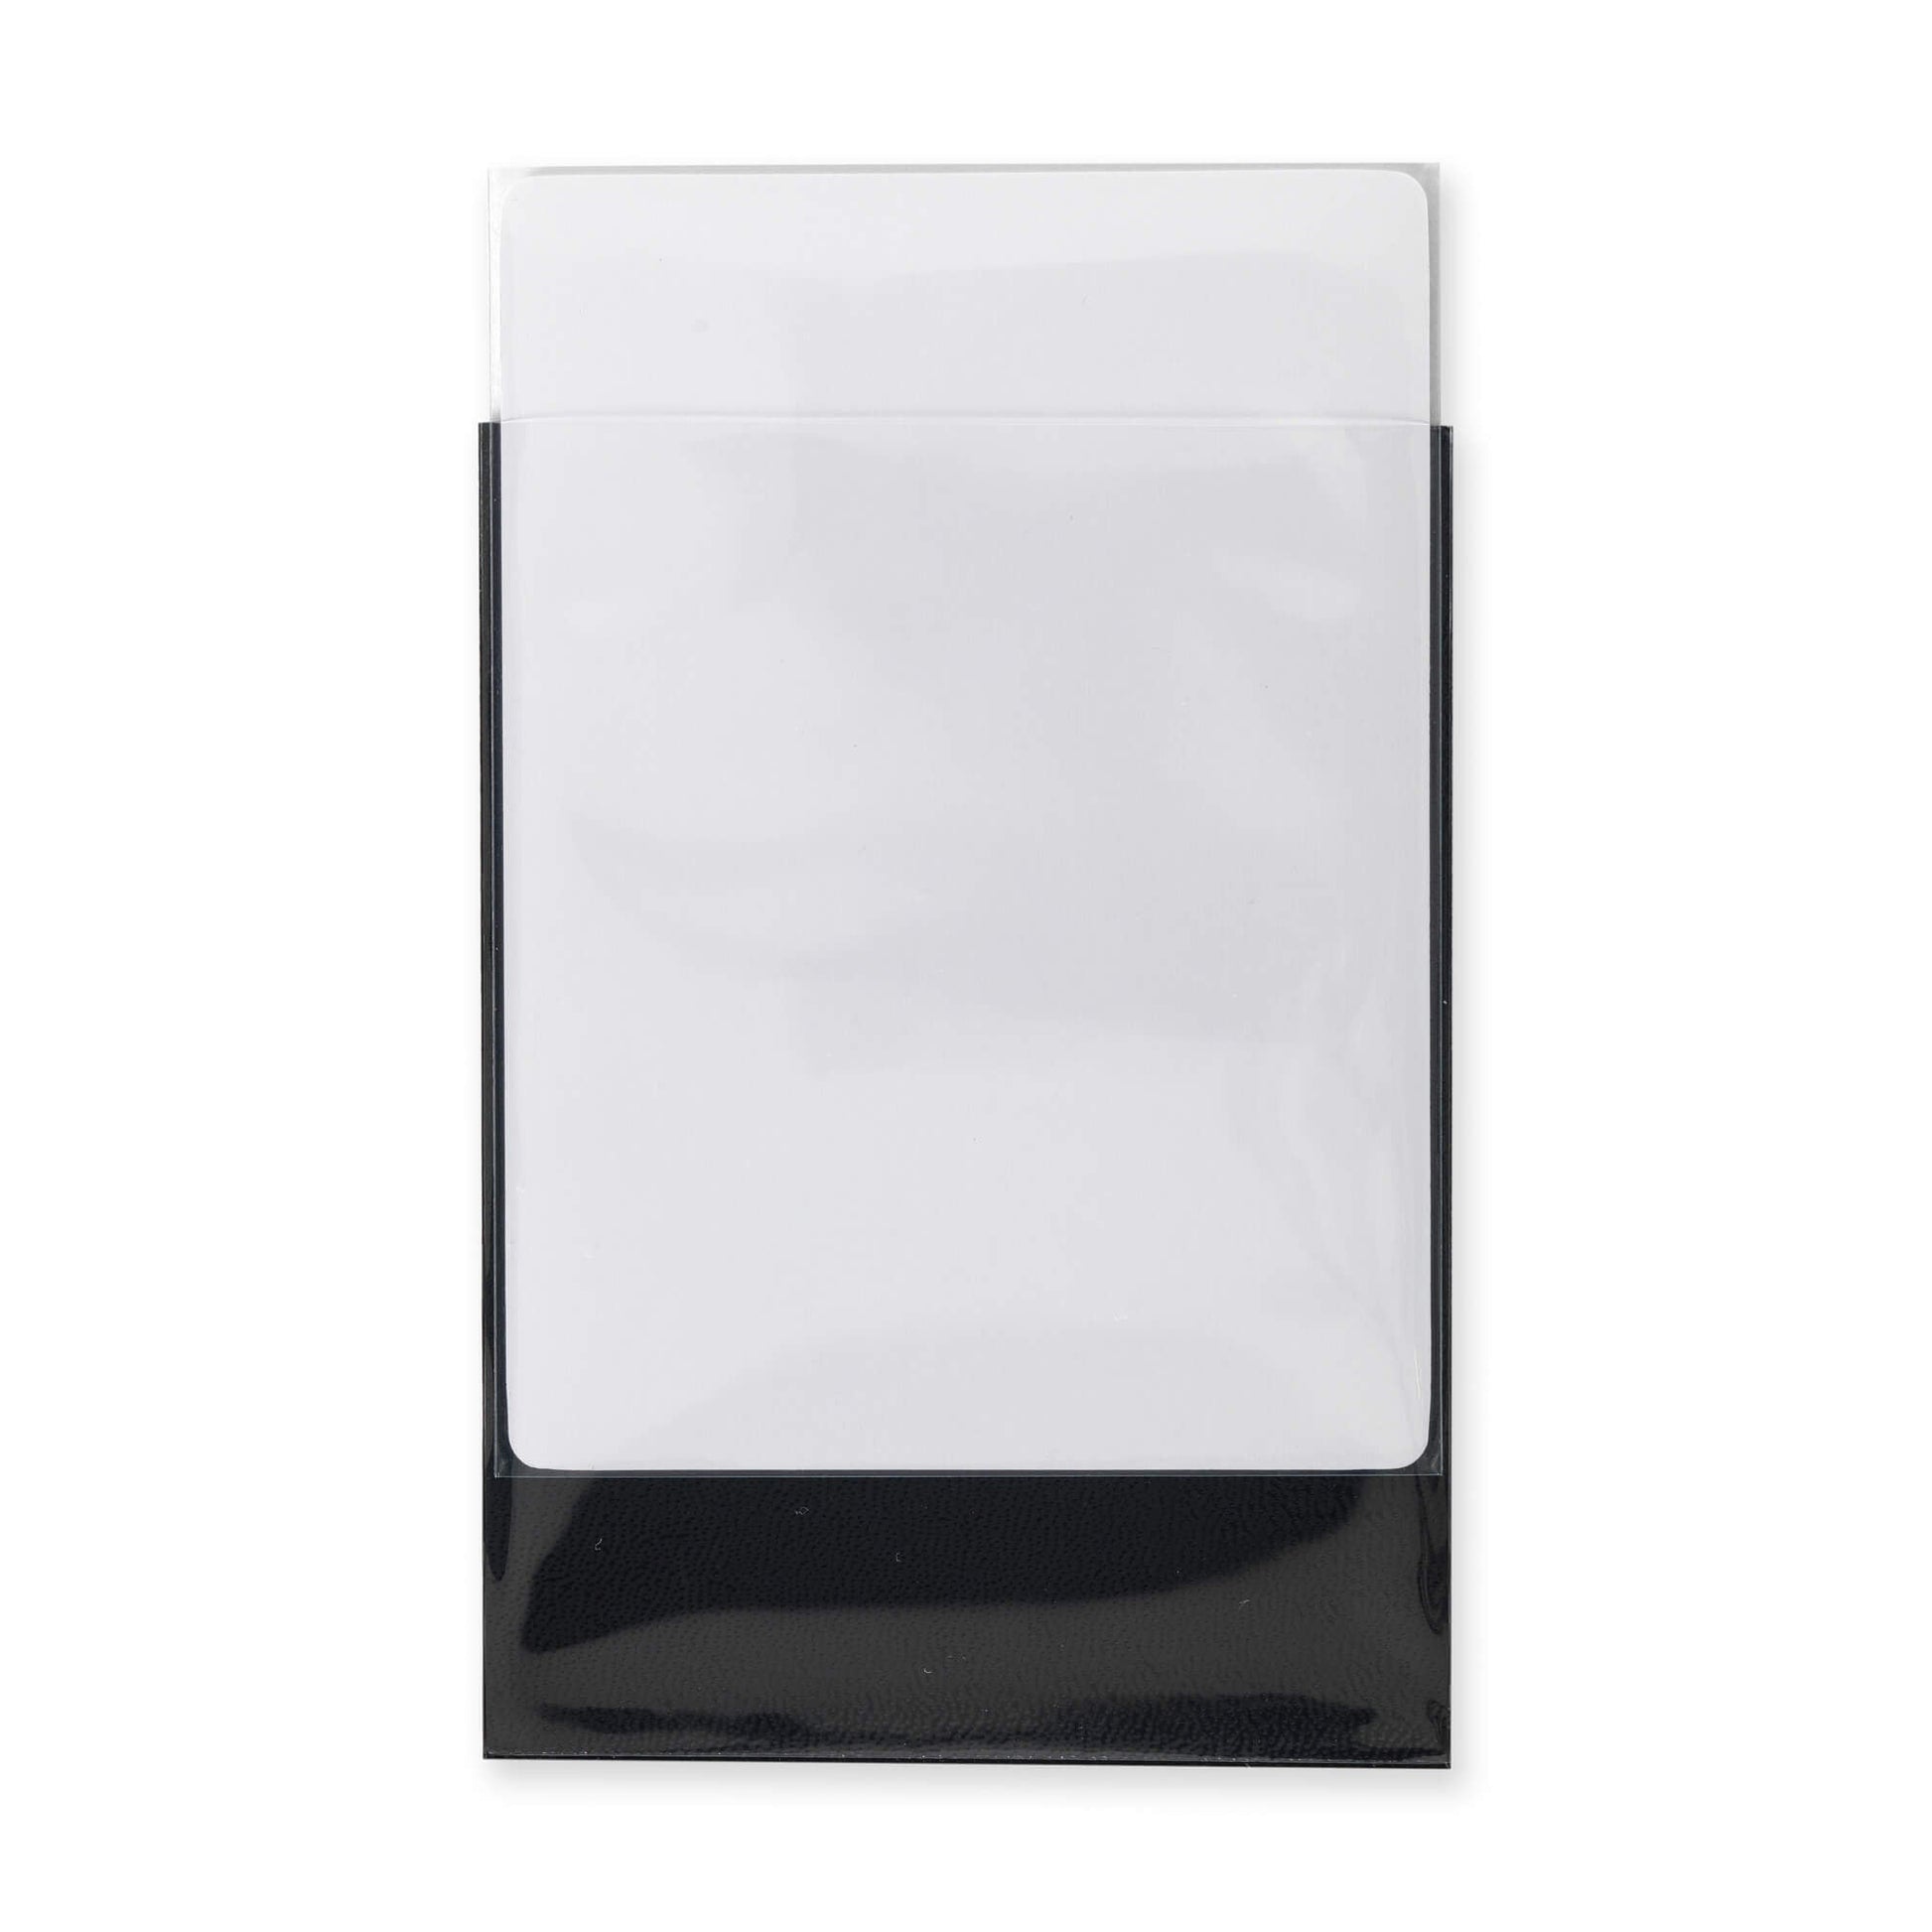 X100 Protèges cartes Precise-Fit Sleeves Transparent - Small Size